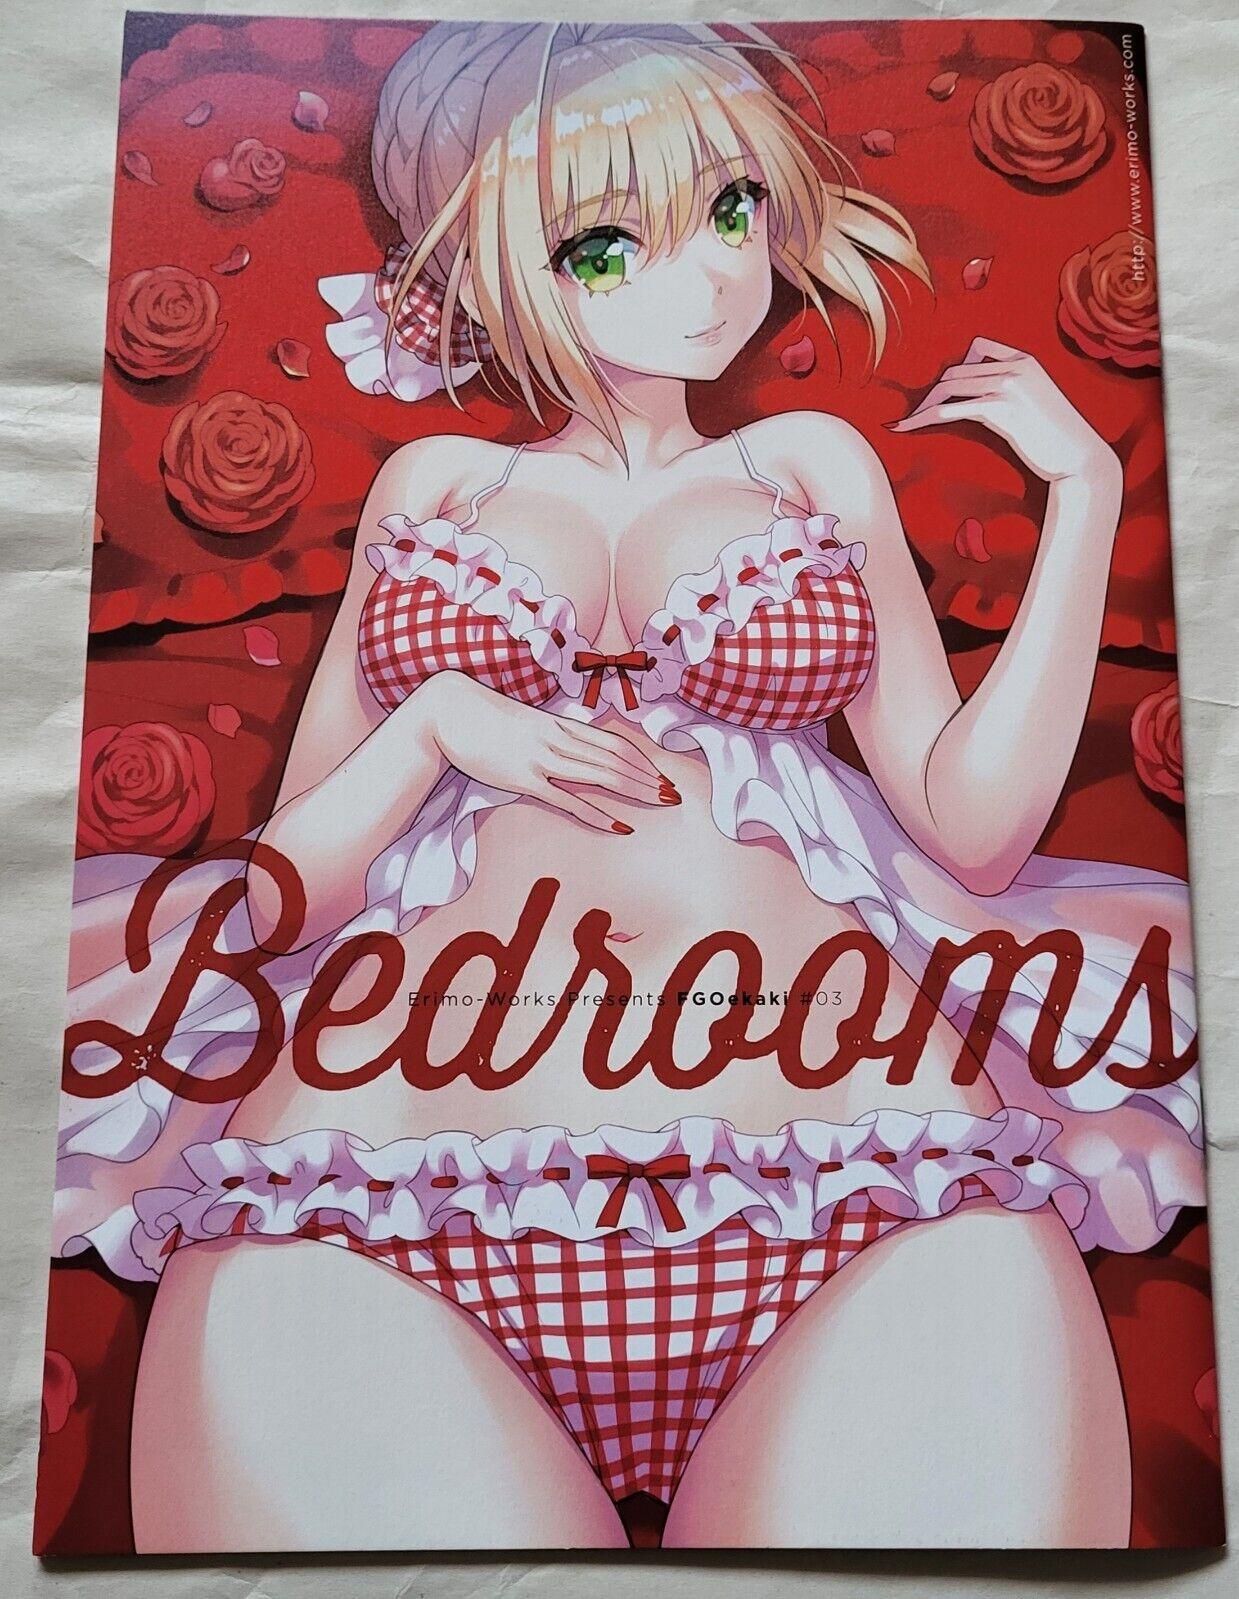 Couples [Erimo] Bedrooms[fate grand order ] sample - Fate grand order Sexy - Picture 1